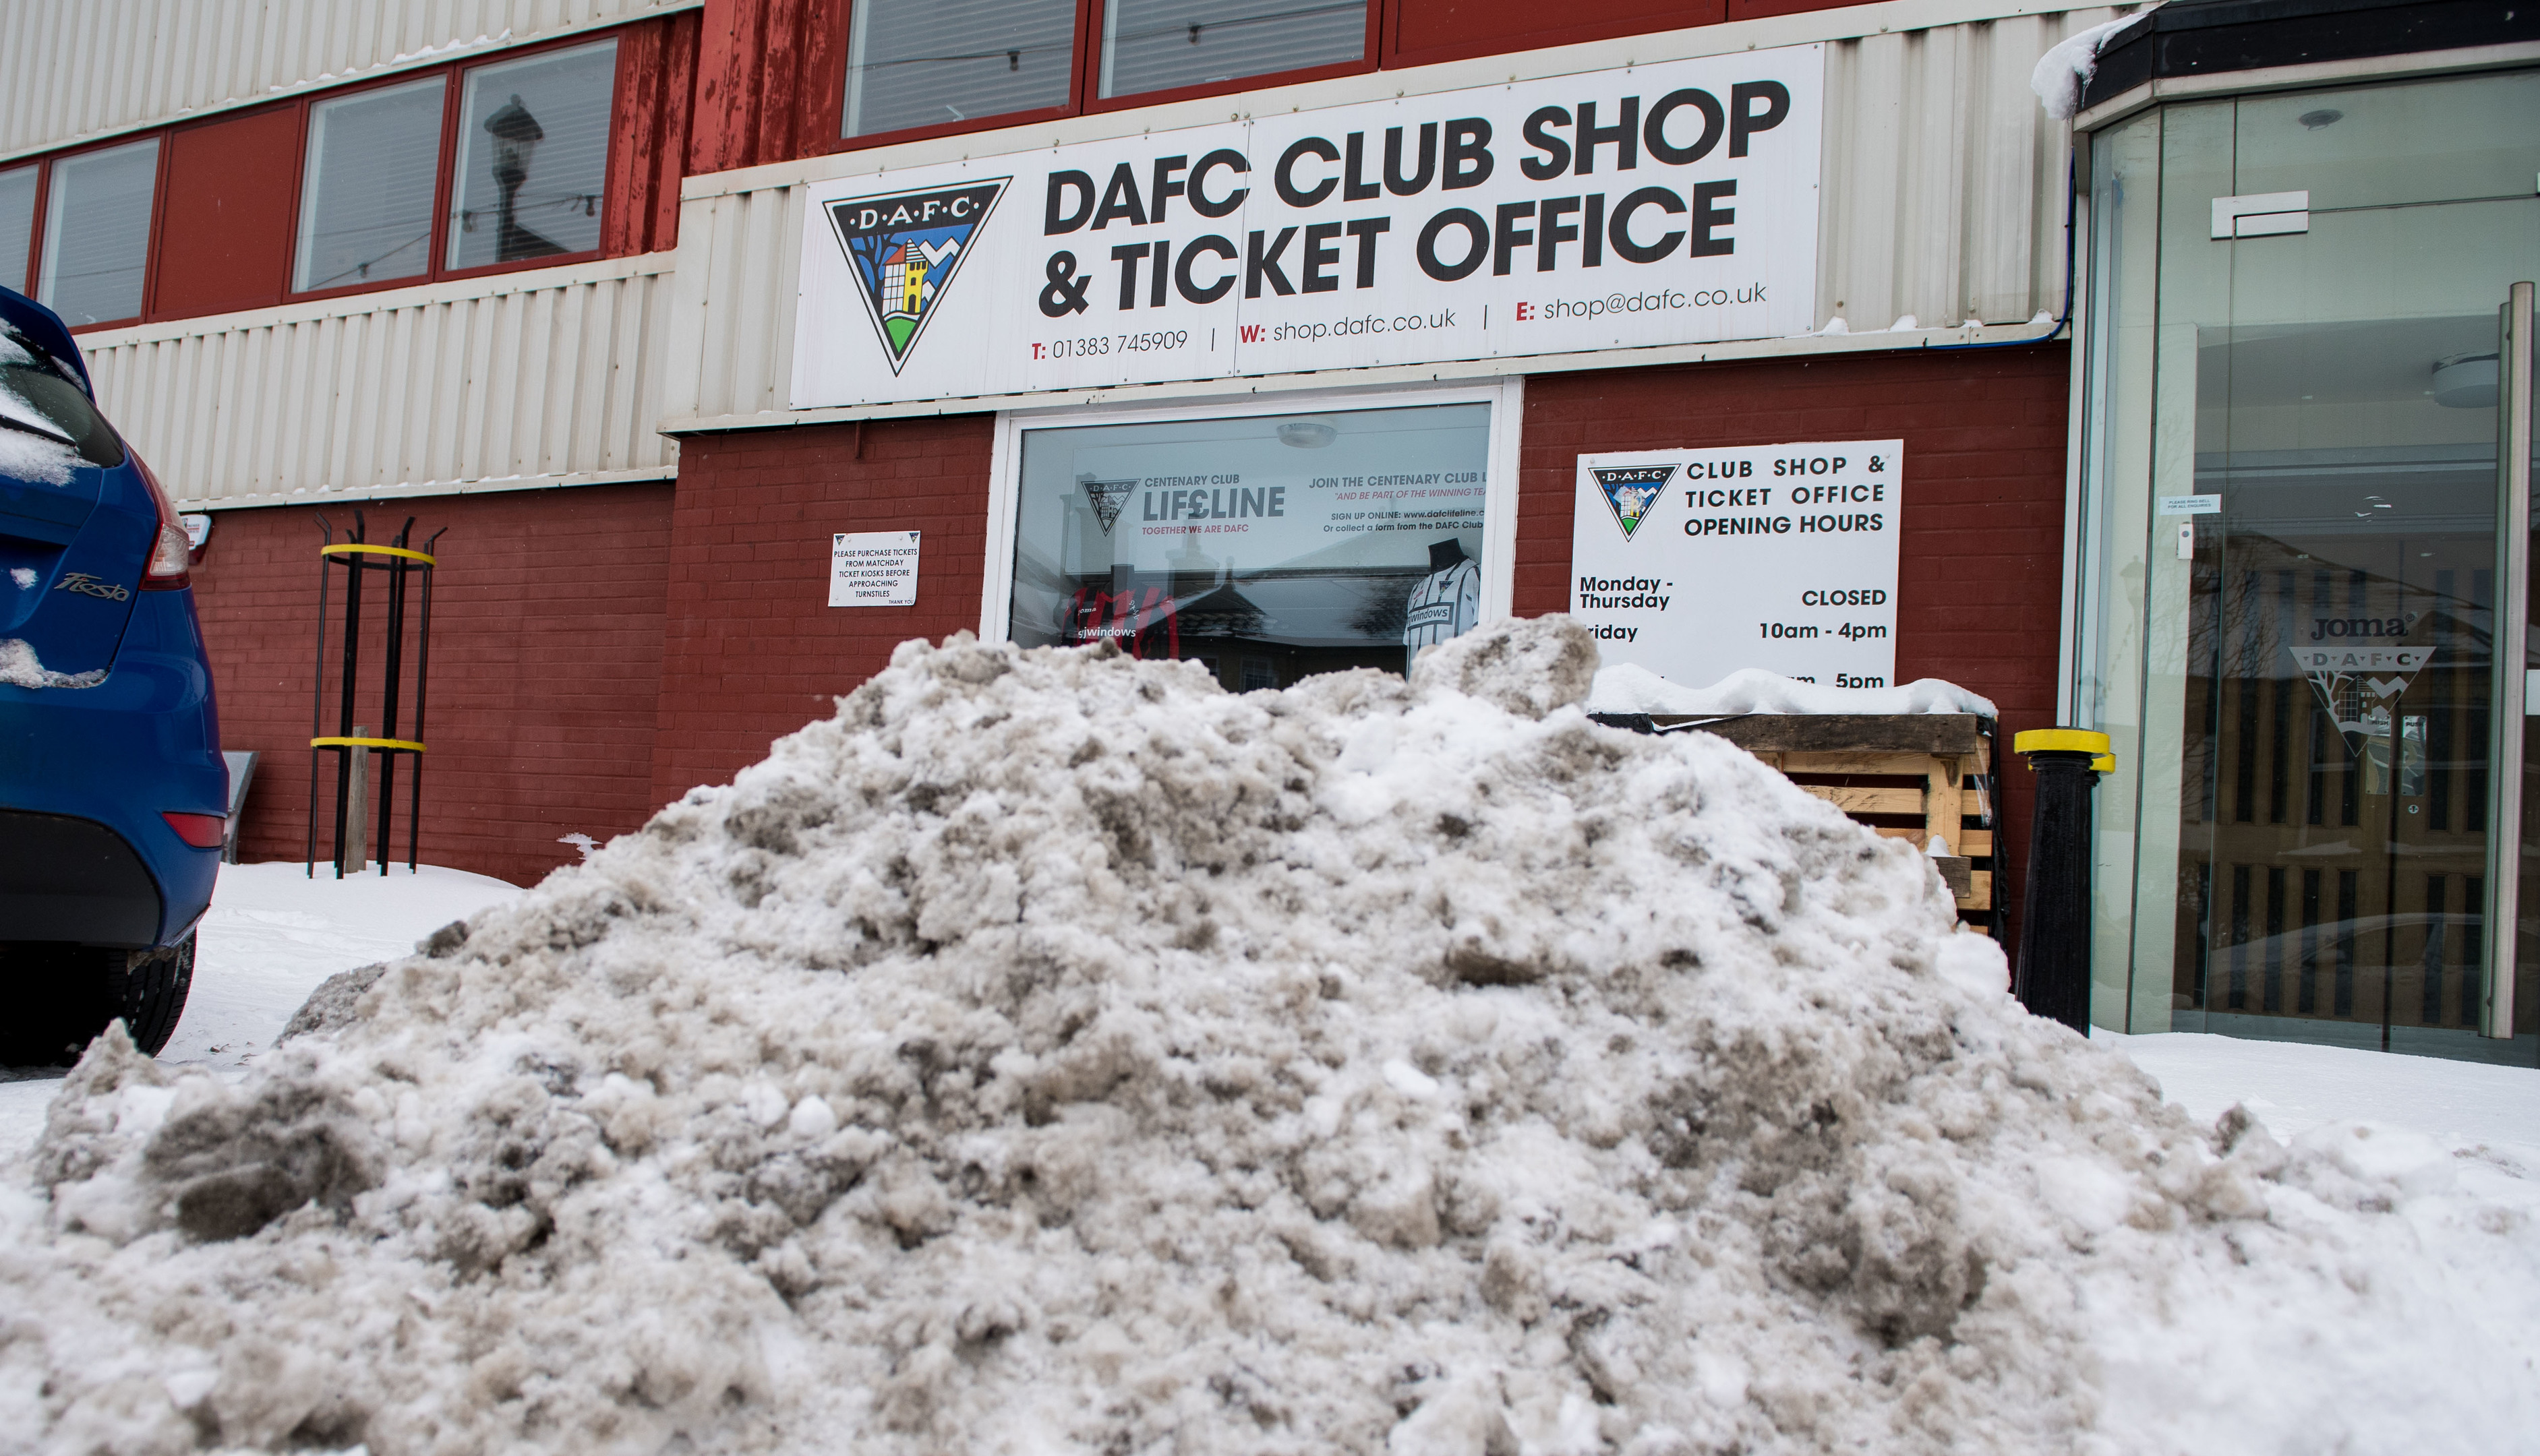 The view outside East End Park during the recent wintry spell.